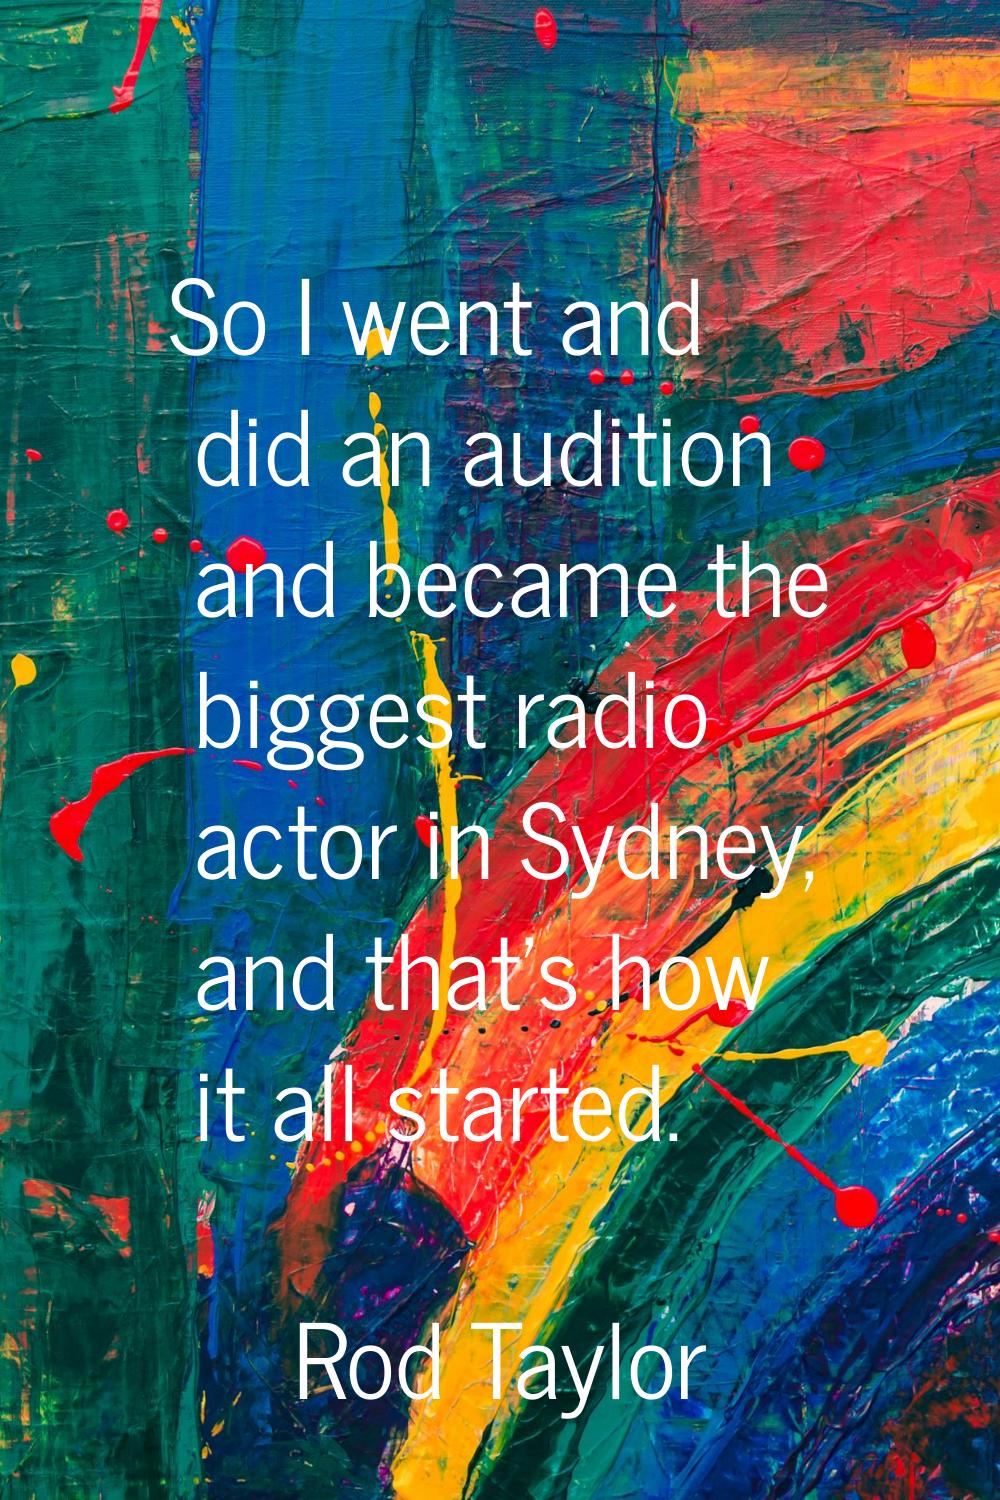 So I went and did an audition and became the biggest radio actor in Sydney, and that's how it all s